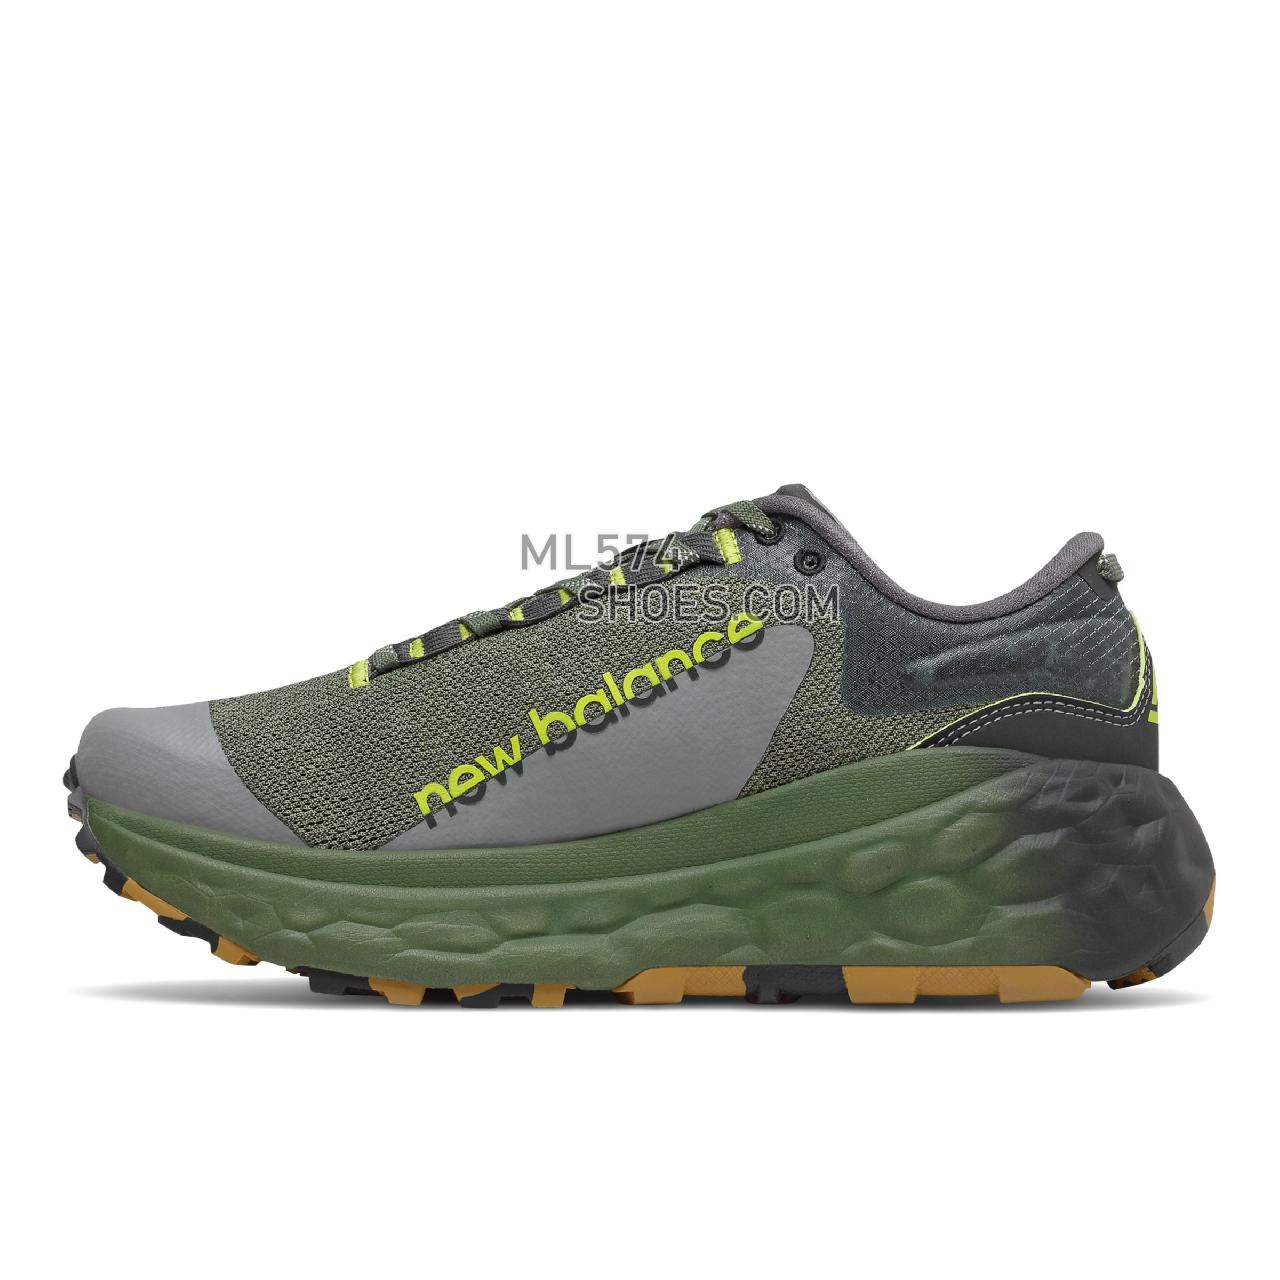 New Balance Fresh Foam X More Trail v2 - Men's Fuelcell Sleek And LightWeight - Norway Spruce with Sulpher Yellow - MTMORLY2